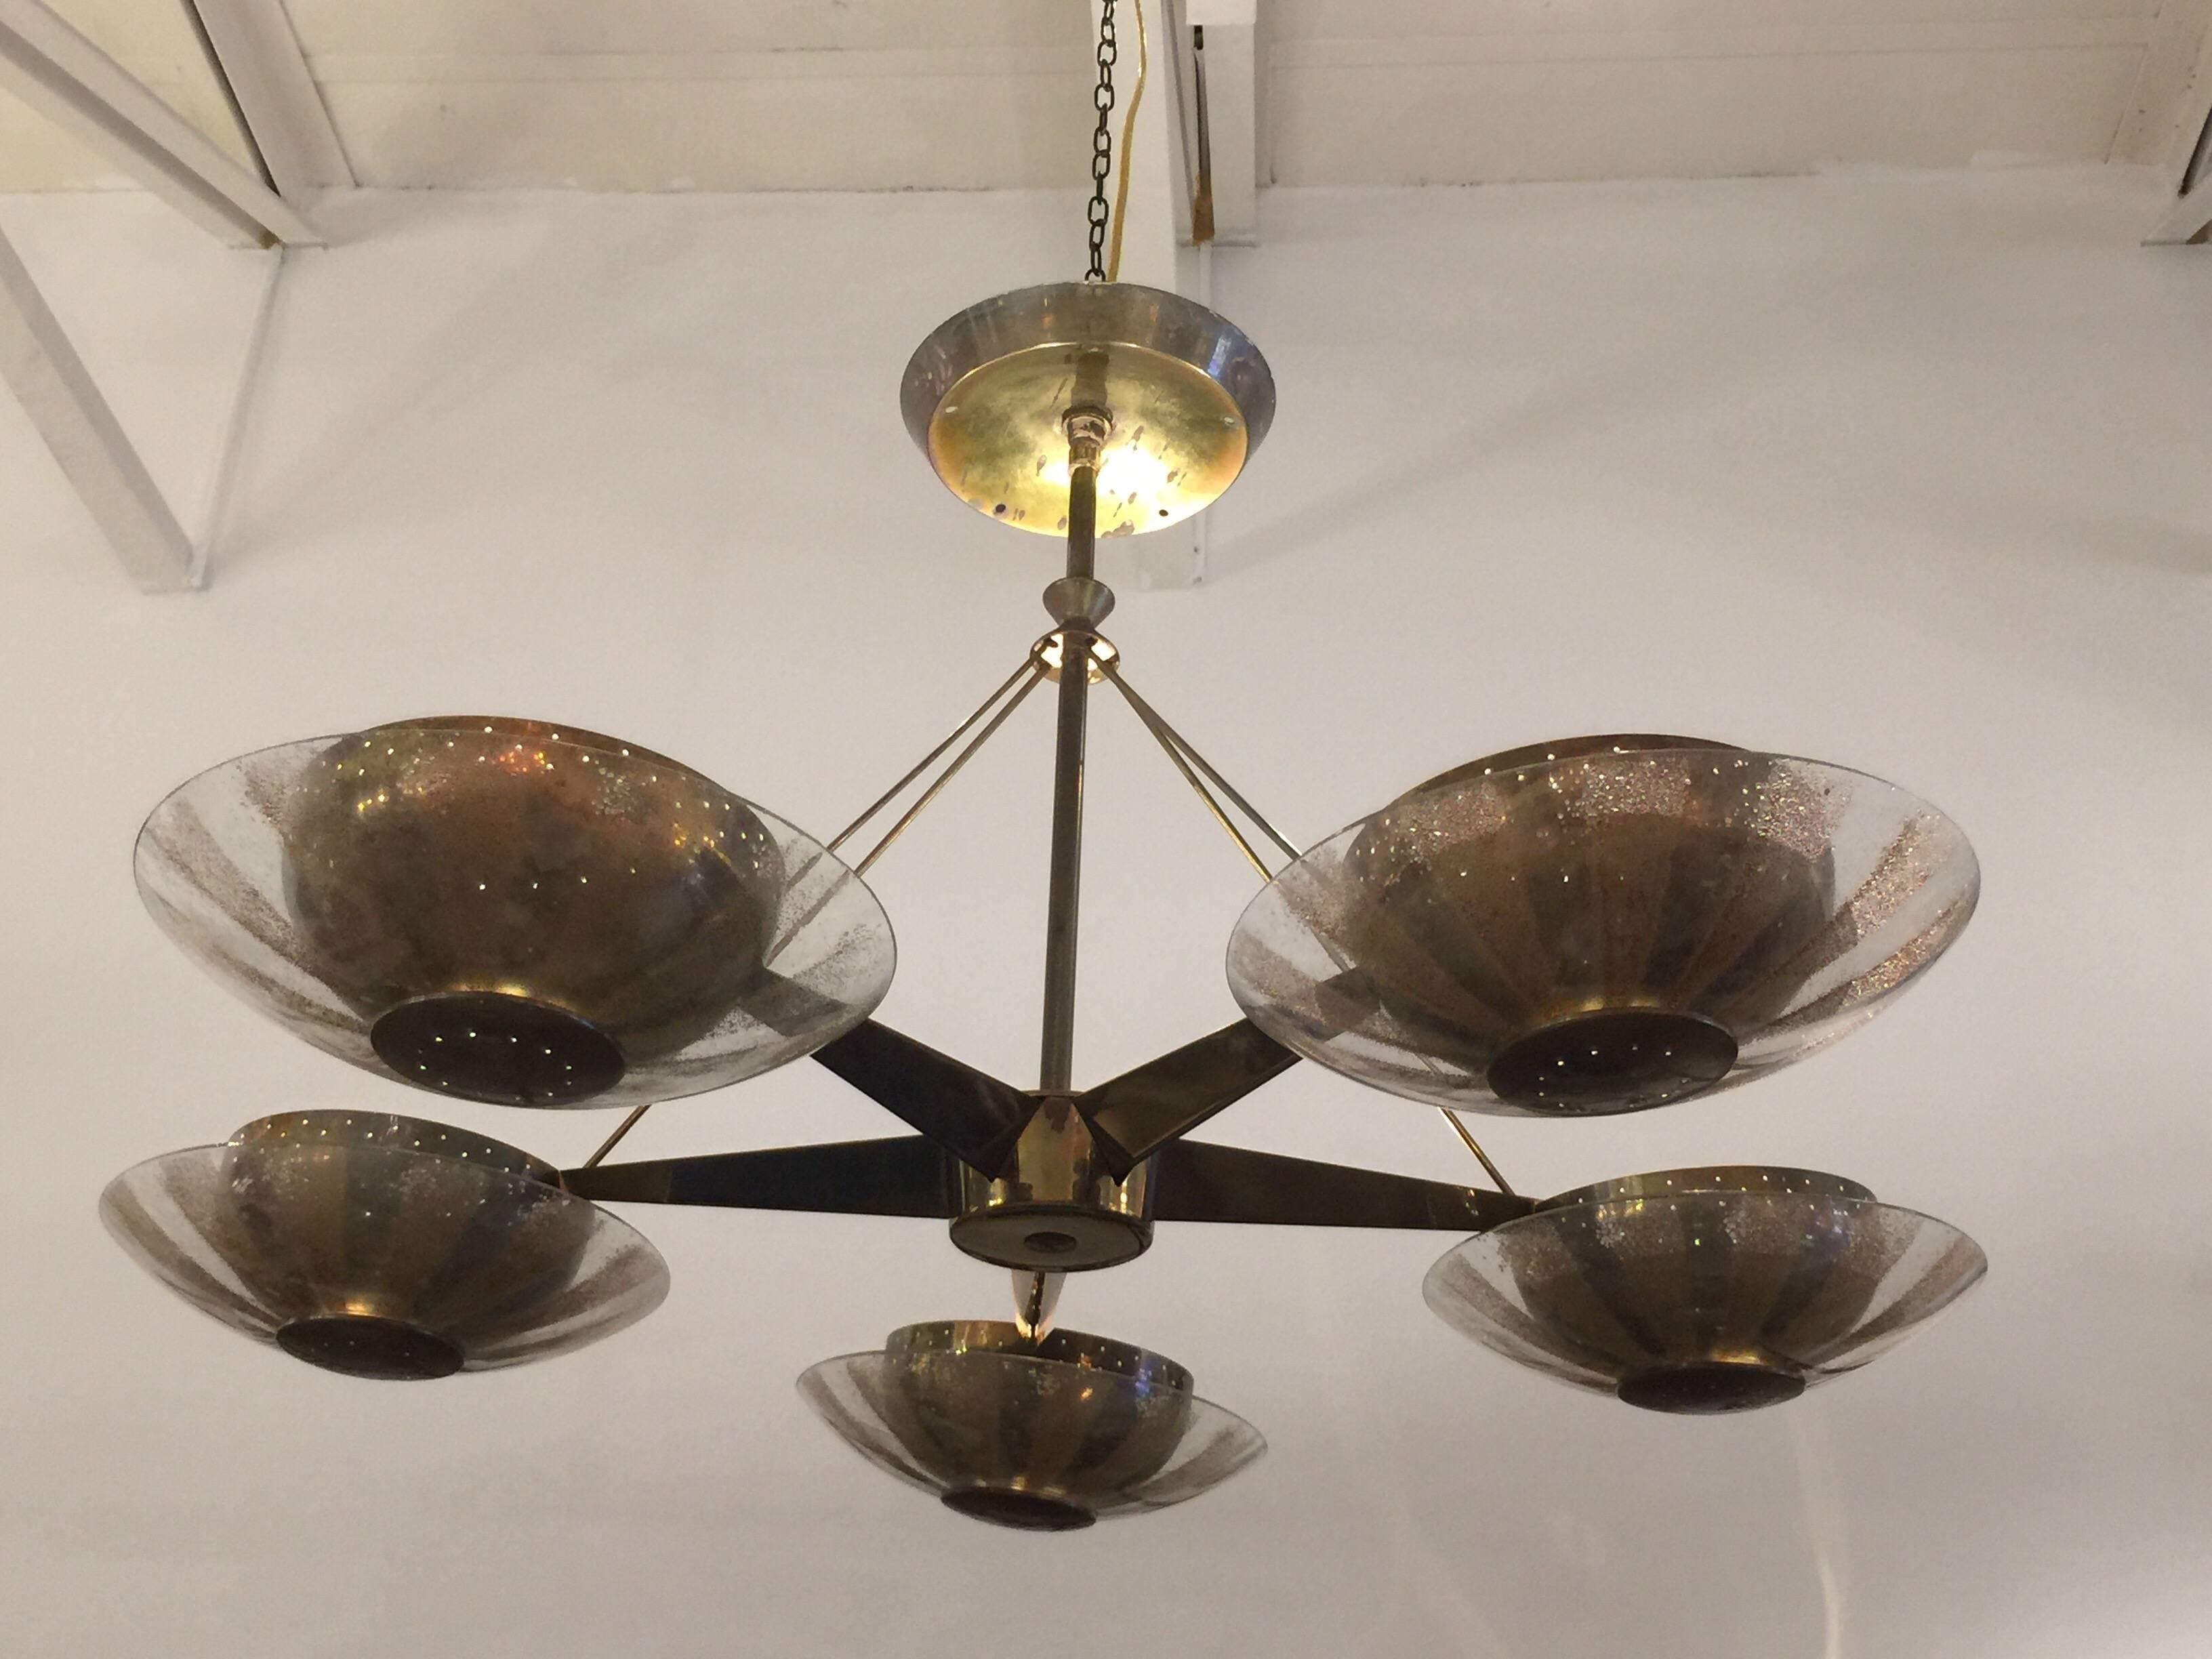 Stunning and romantic, this five-arm chandelier in star design with beautifully patinated brass. Each arm has a perforated brass cup and glass difuser with gold flake design. This is all original and in wonderful working condition, rewired.